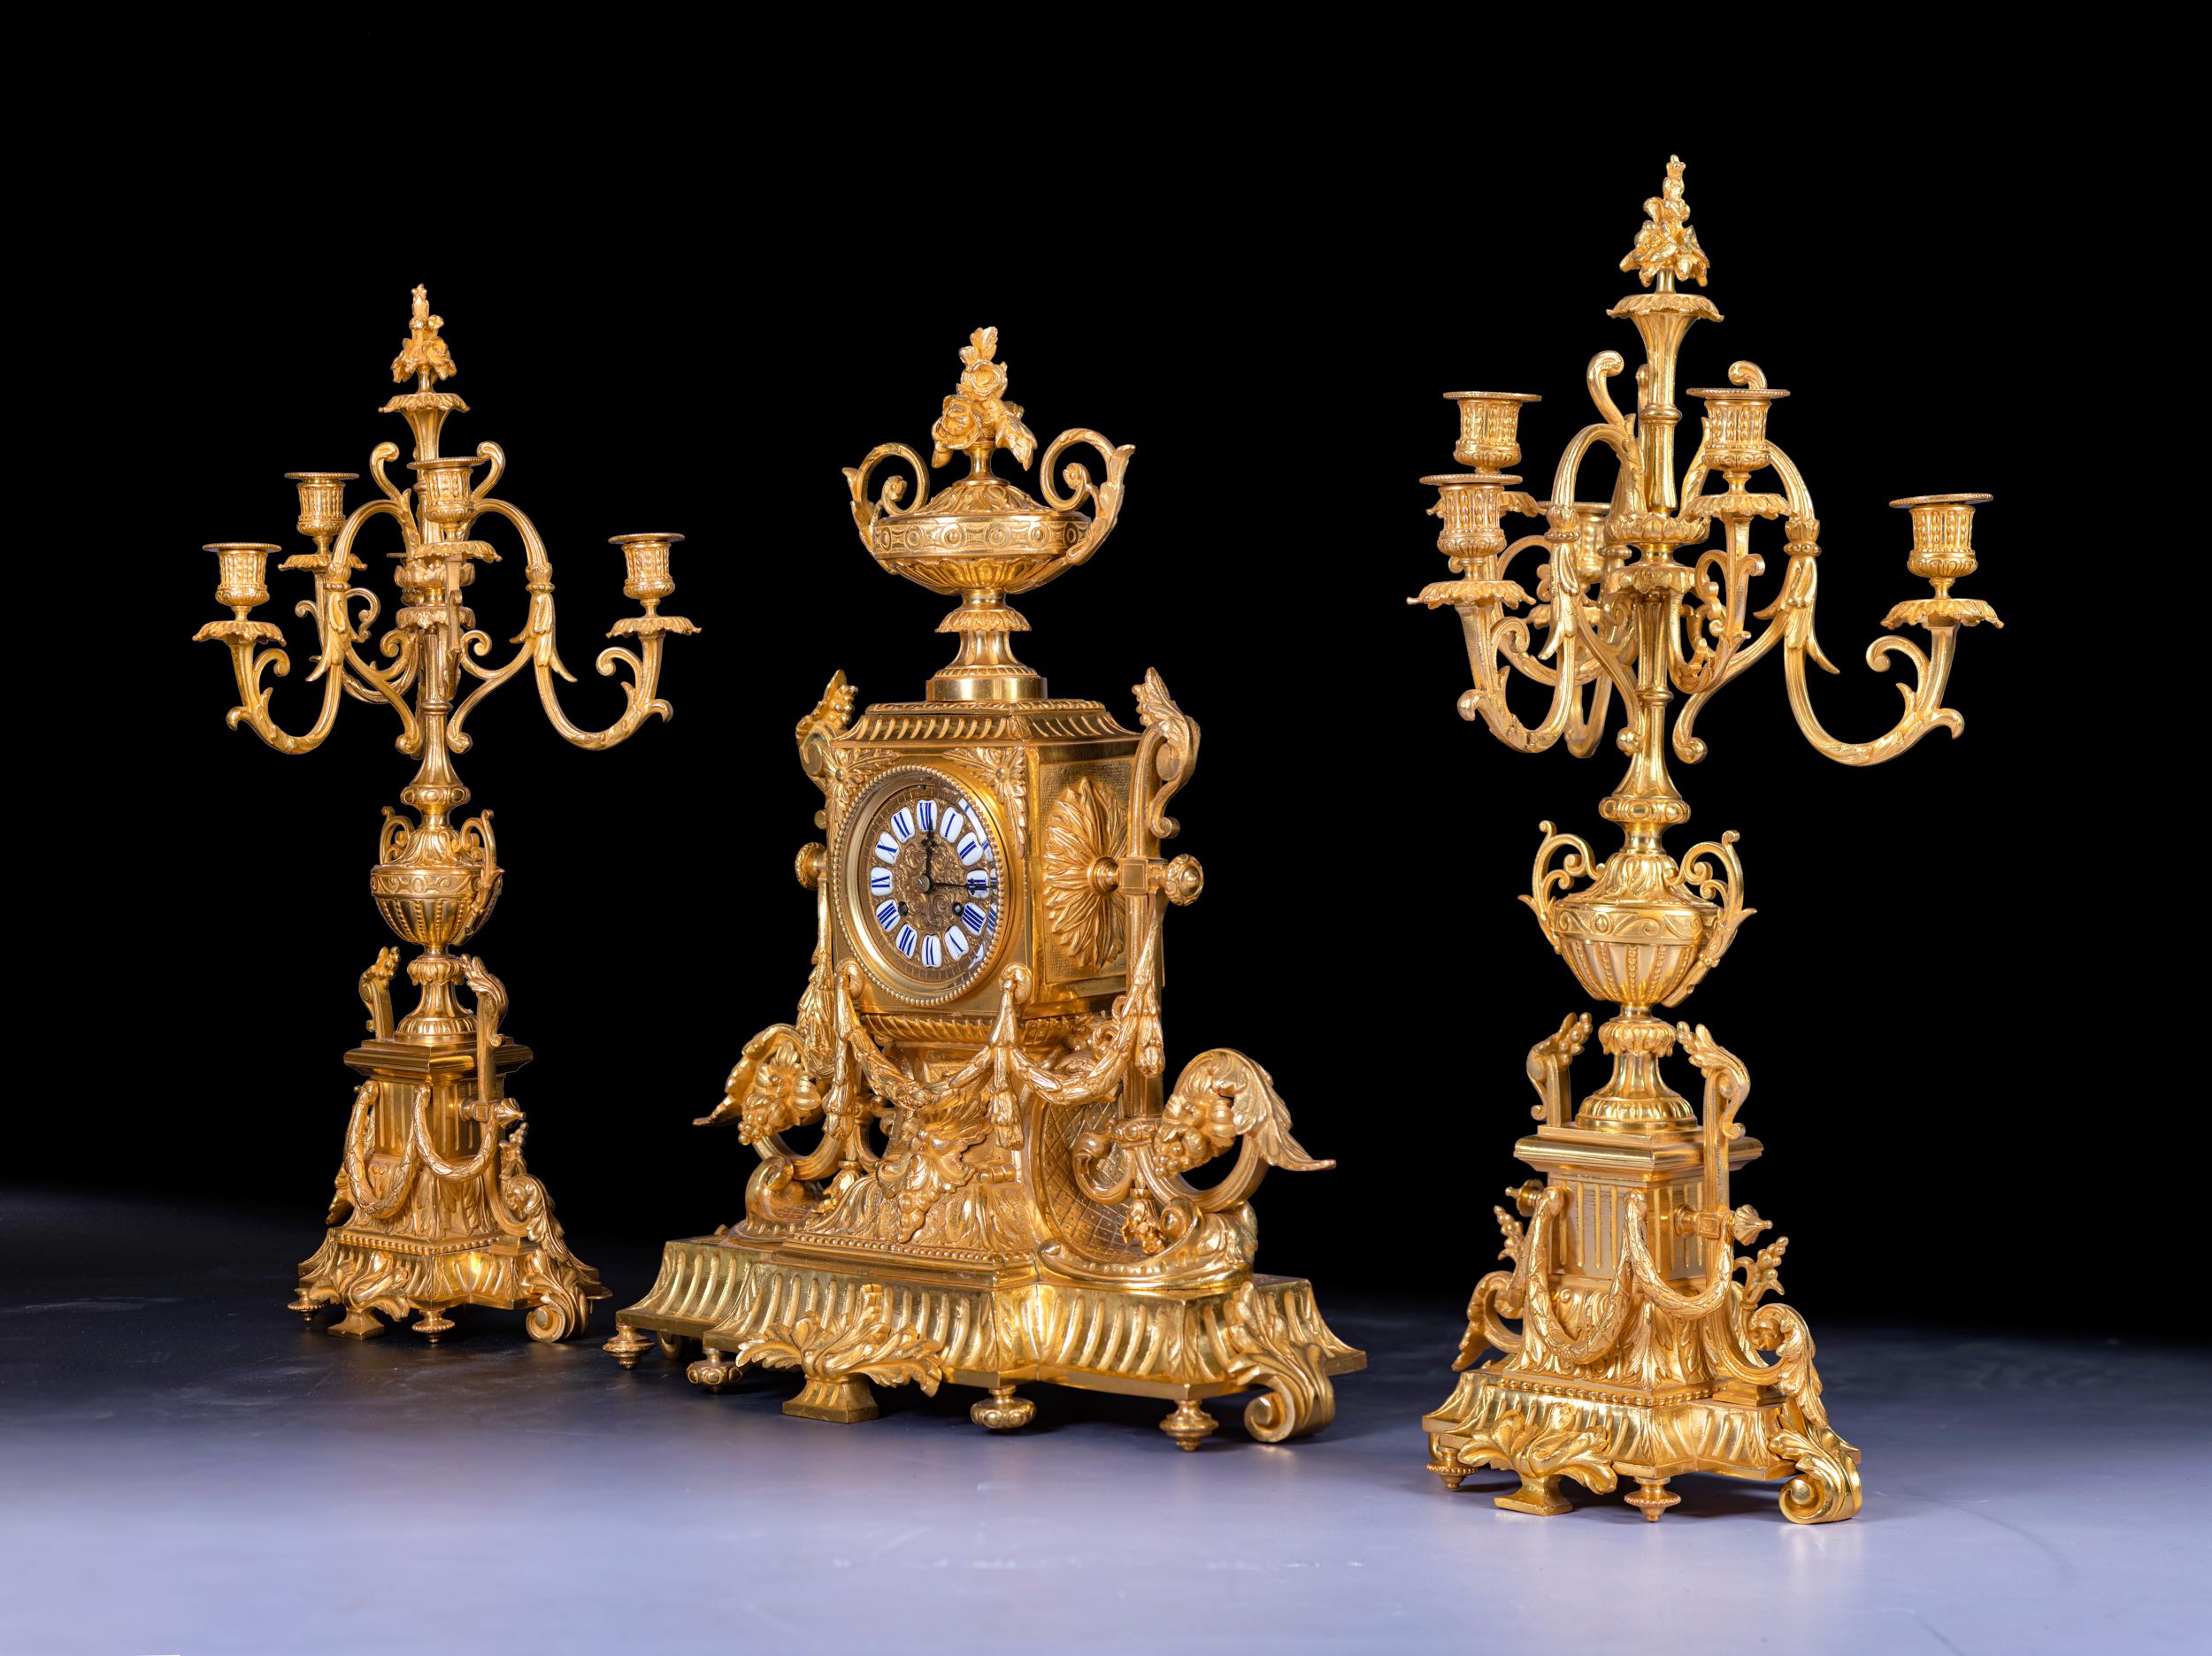 Measures: H: 25 1/2 in / 64.7 cm ; W: 22 1/4 in / 56.5 cm ; D: 9 1/2 in / 24.2 cm

An exceptional quality three-piece clock set designed in a grand neoclassical.
The set is comprised of a central clock and two flanking candelabra. The clock